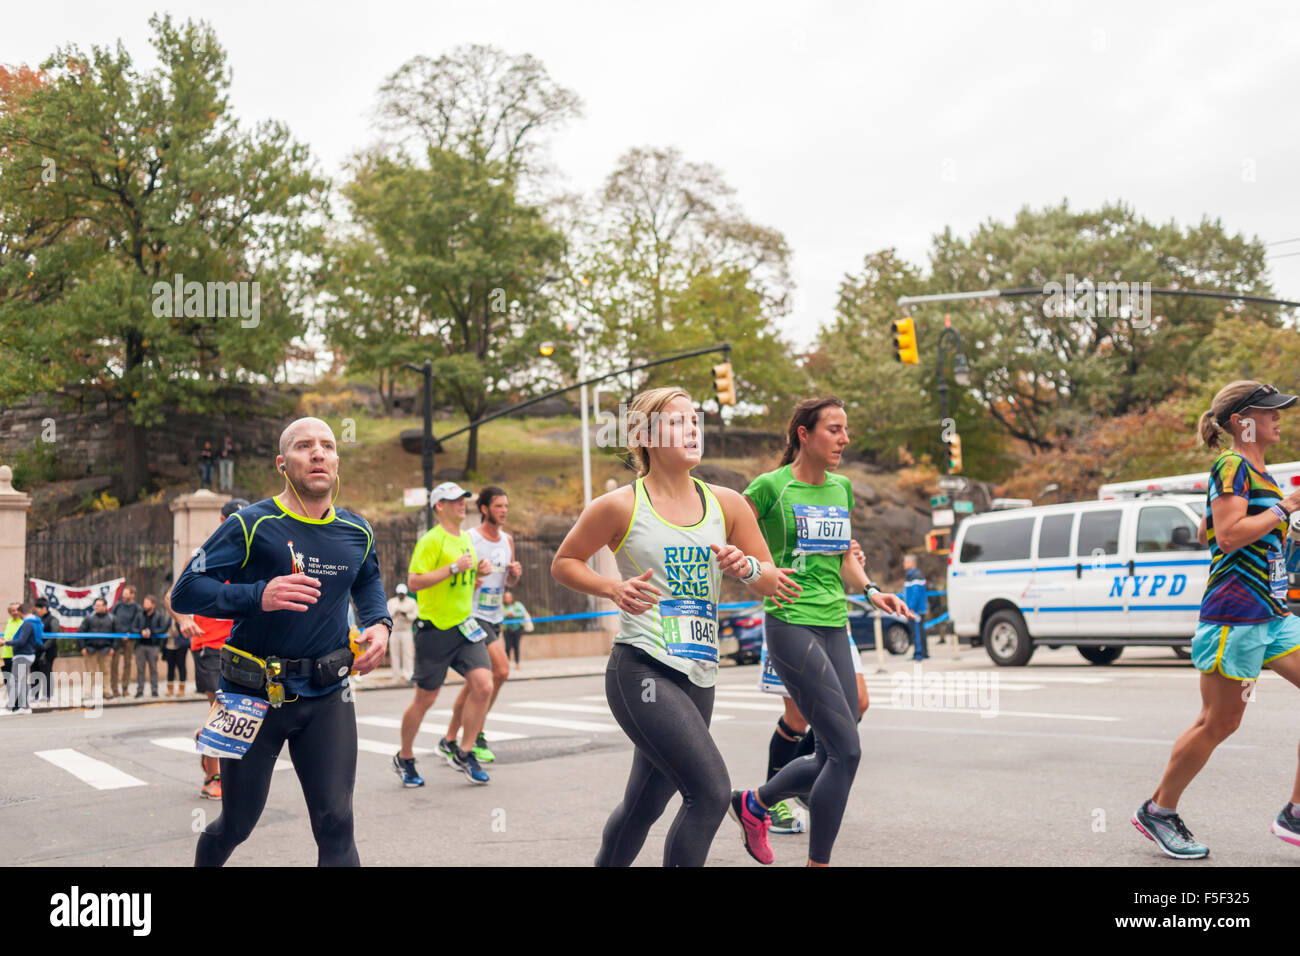 Runners pass through Harlem in New York near the 22 mile mark near Mount Morris Park on Sunday, November 1, 2015 in the  45th annual TCS New York City Marathon. Over 50,000 runners are expected to finish the race, the world's largest marathon.  (© Richard B. Levine) Stock Photo